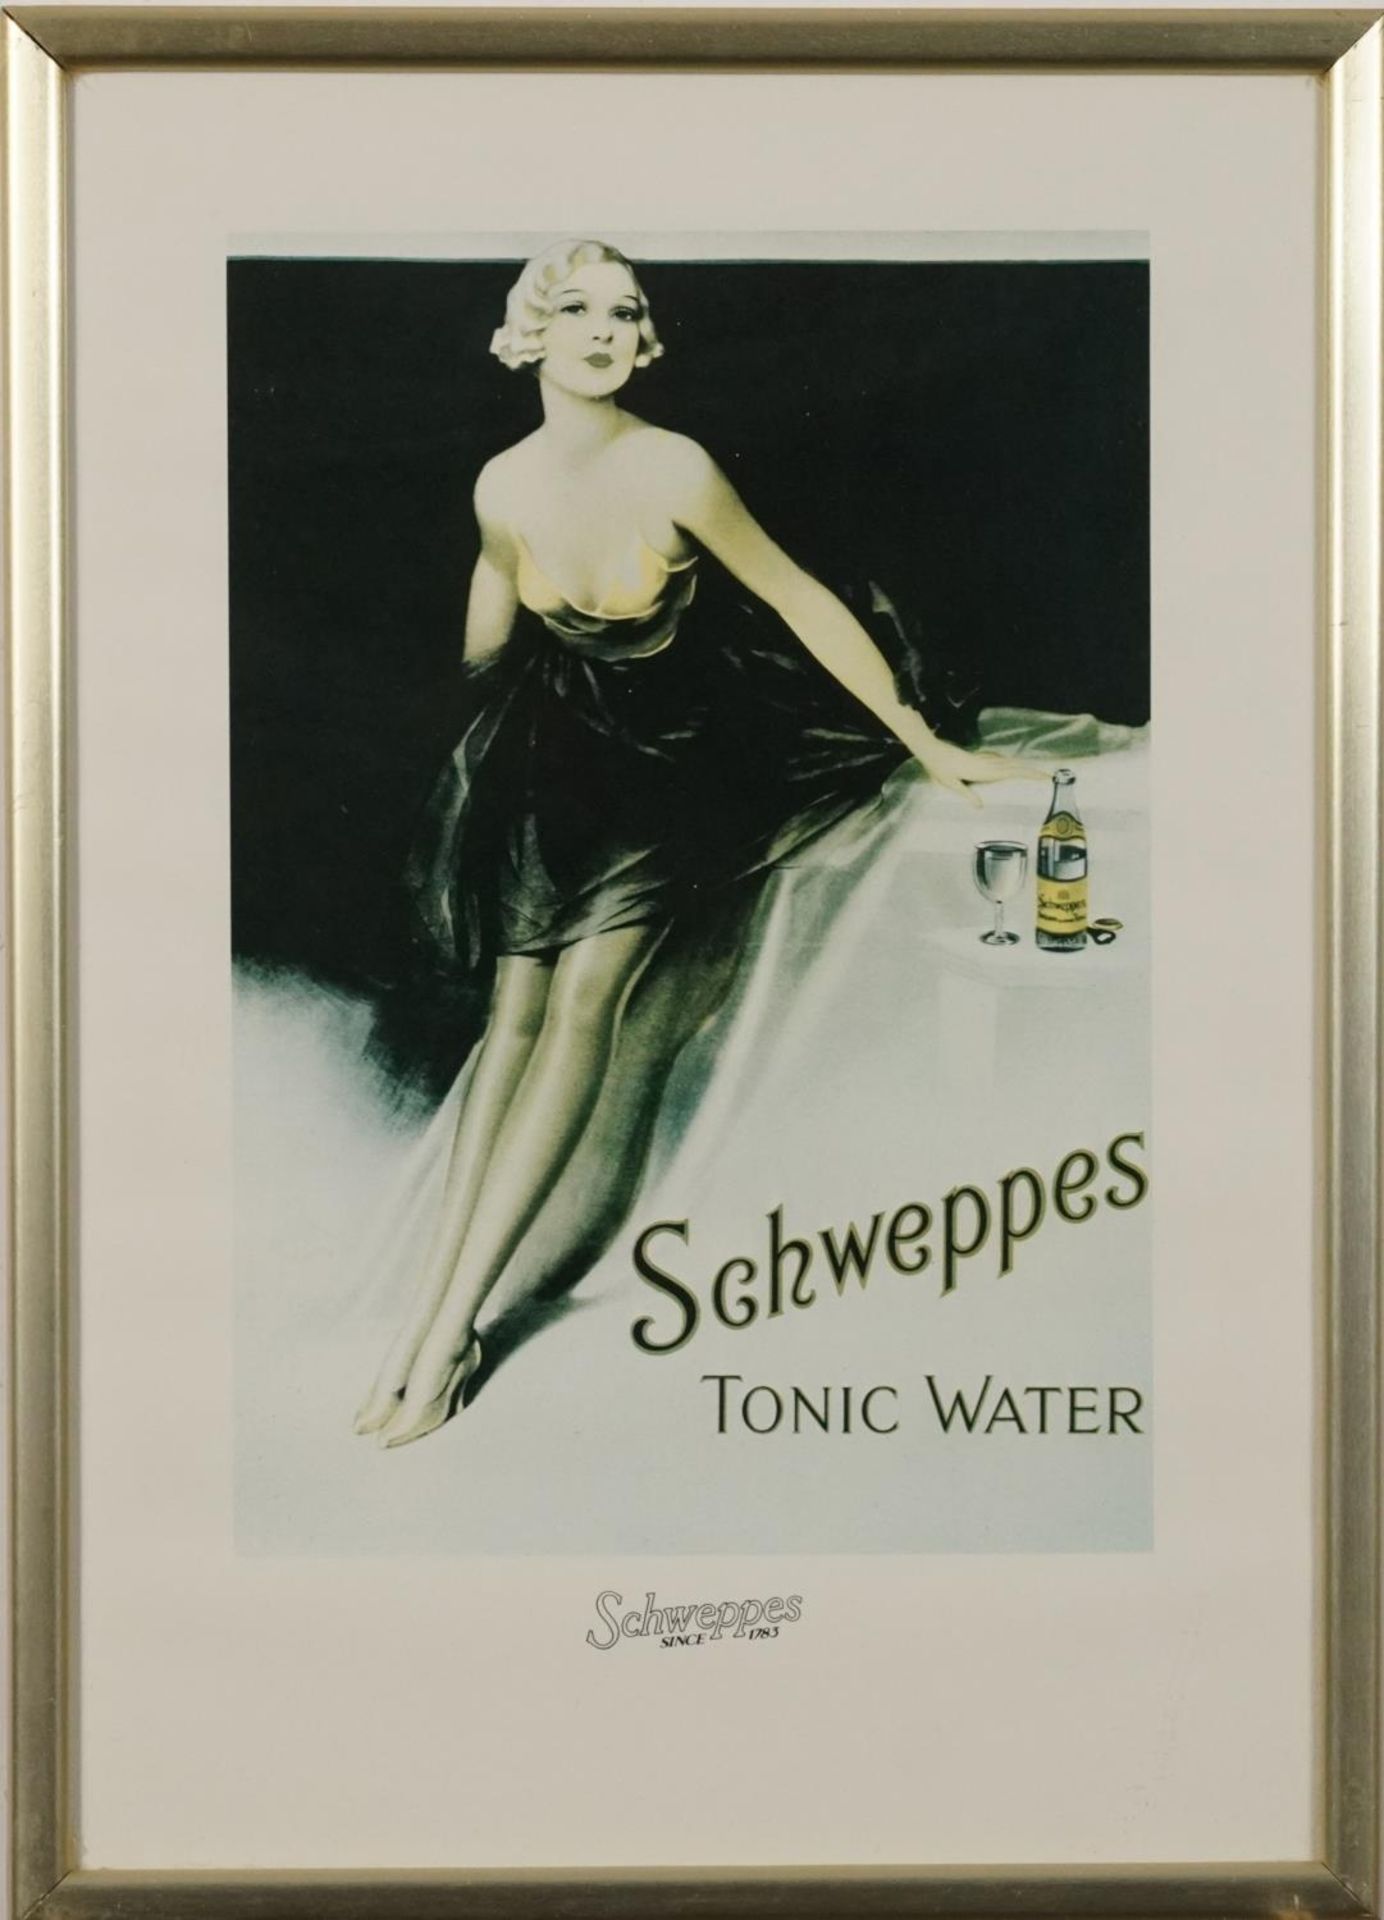 Schweppes, Cider, Tonic Water, Ginger Ale and Lemon Squash, set of six posters, framed and glazed, - Image 10 of 20